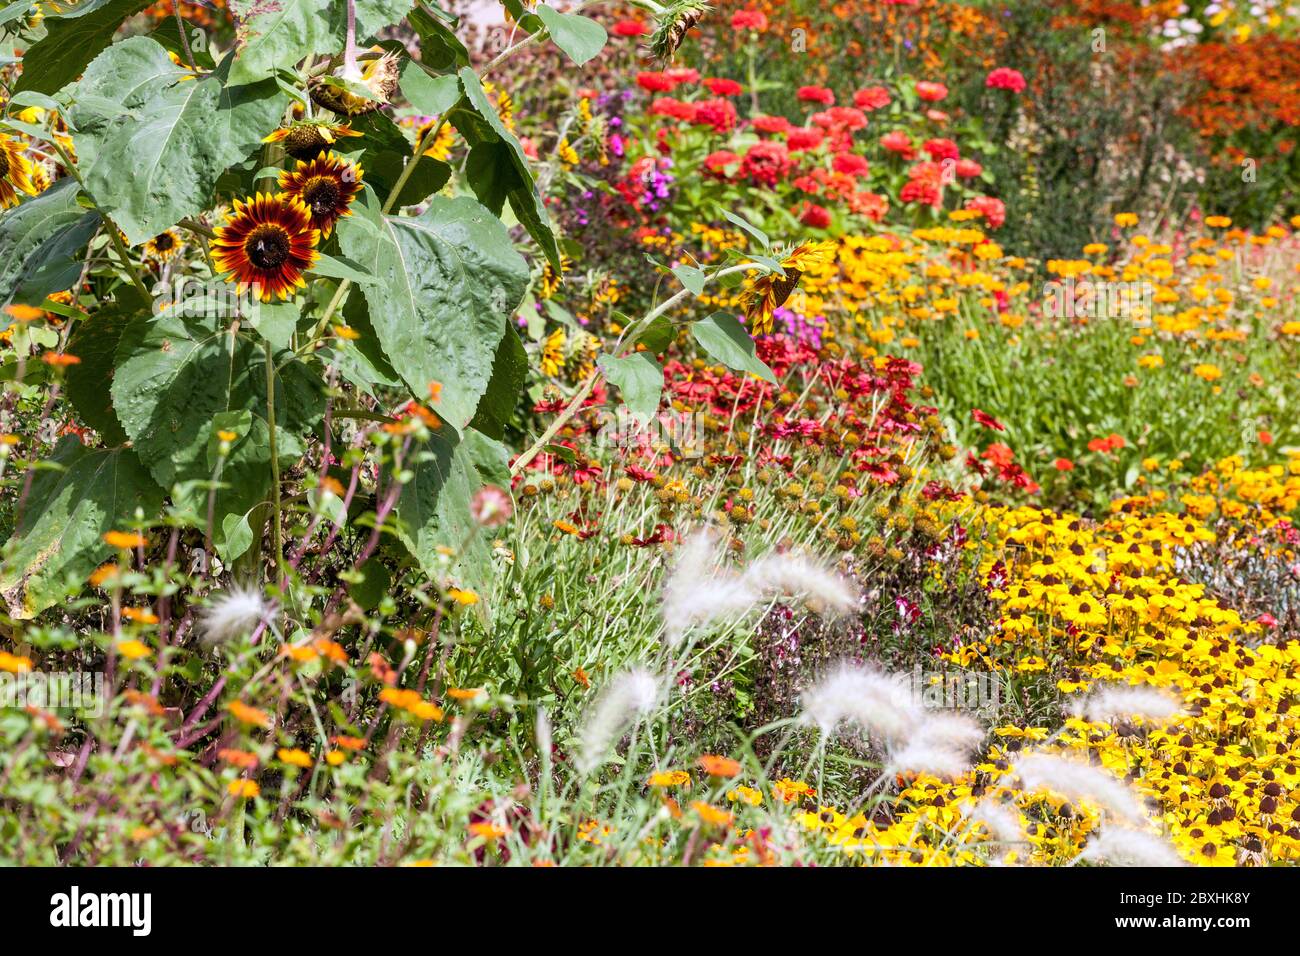 Colorful Summer Garden Sunflowers Zinnias Yellow Red Flower Bed August Flowers Colourful Flowerbed Mixed Plants Border Decorative Cottage garden Stock Photo